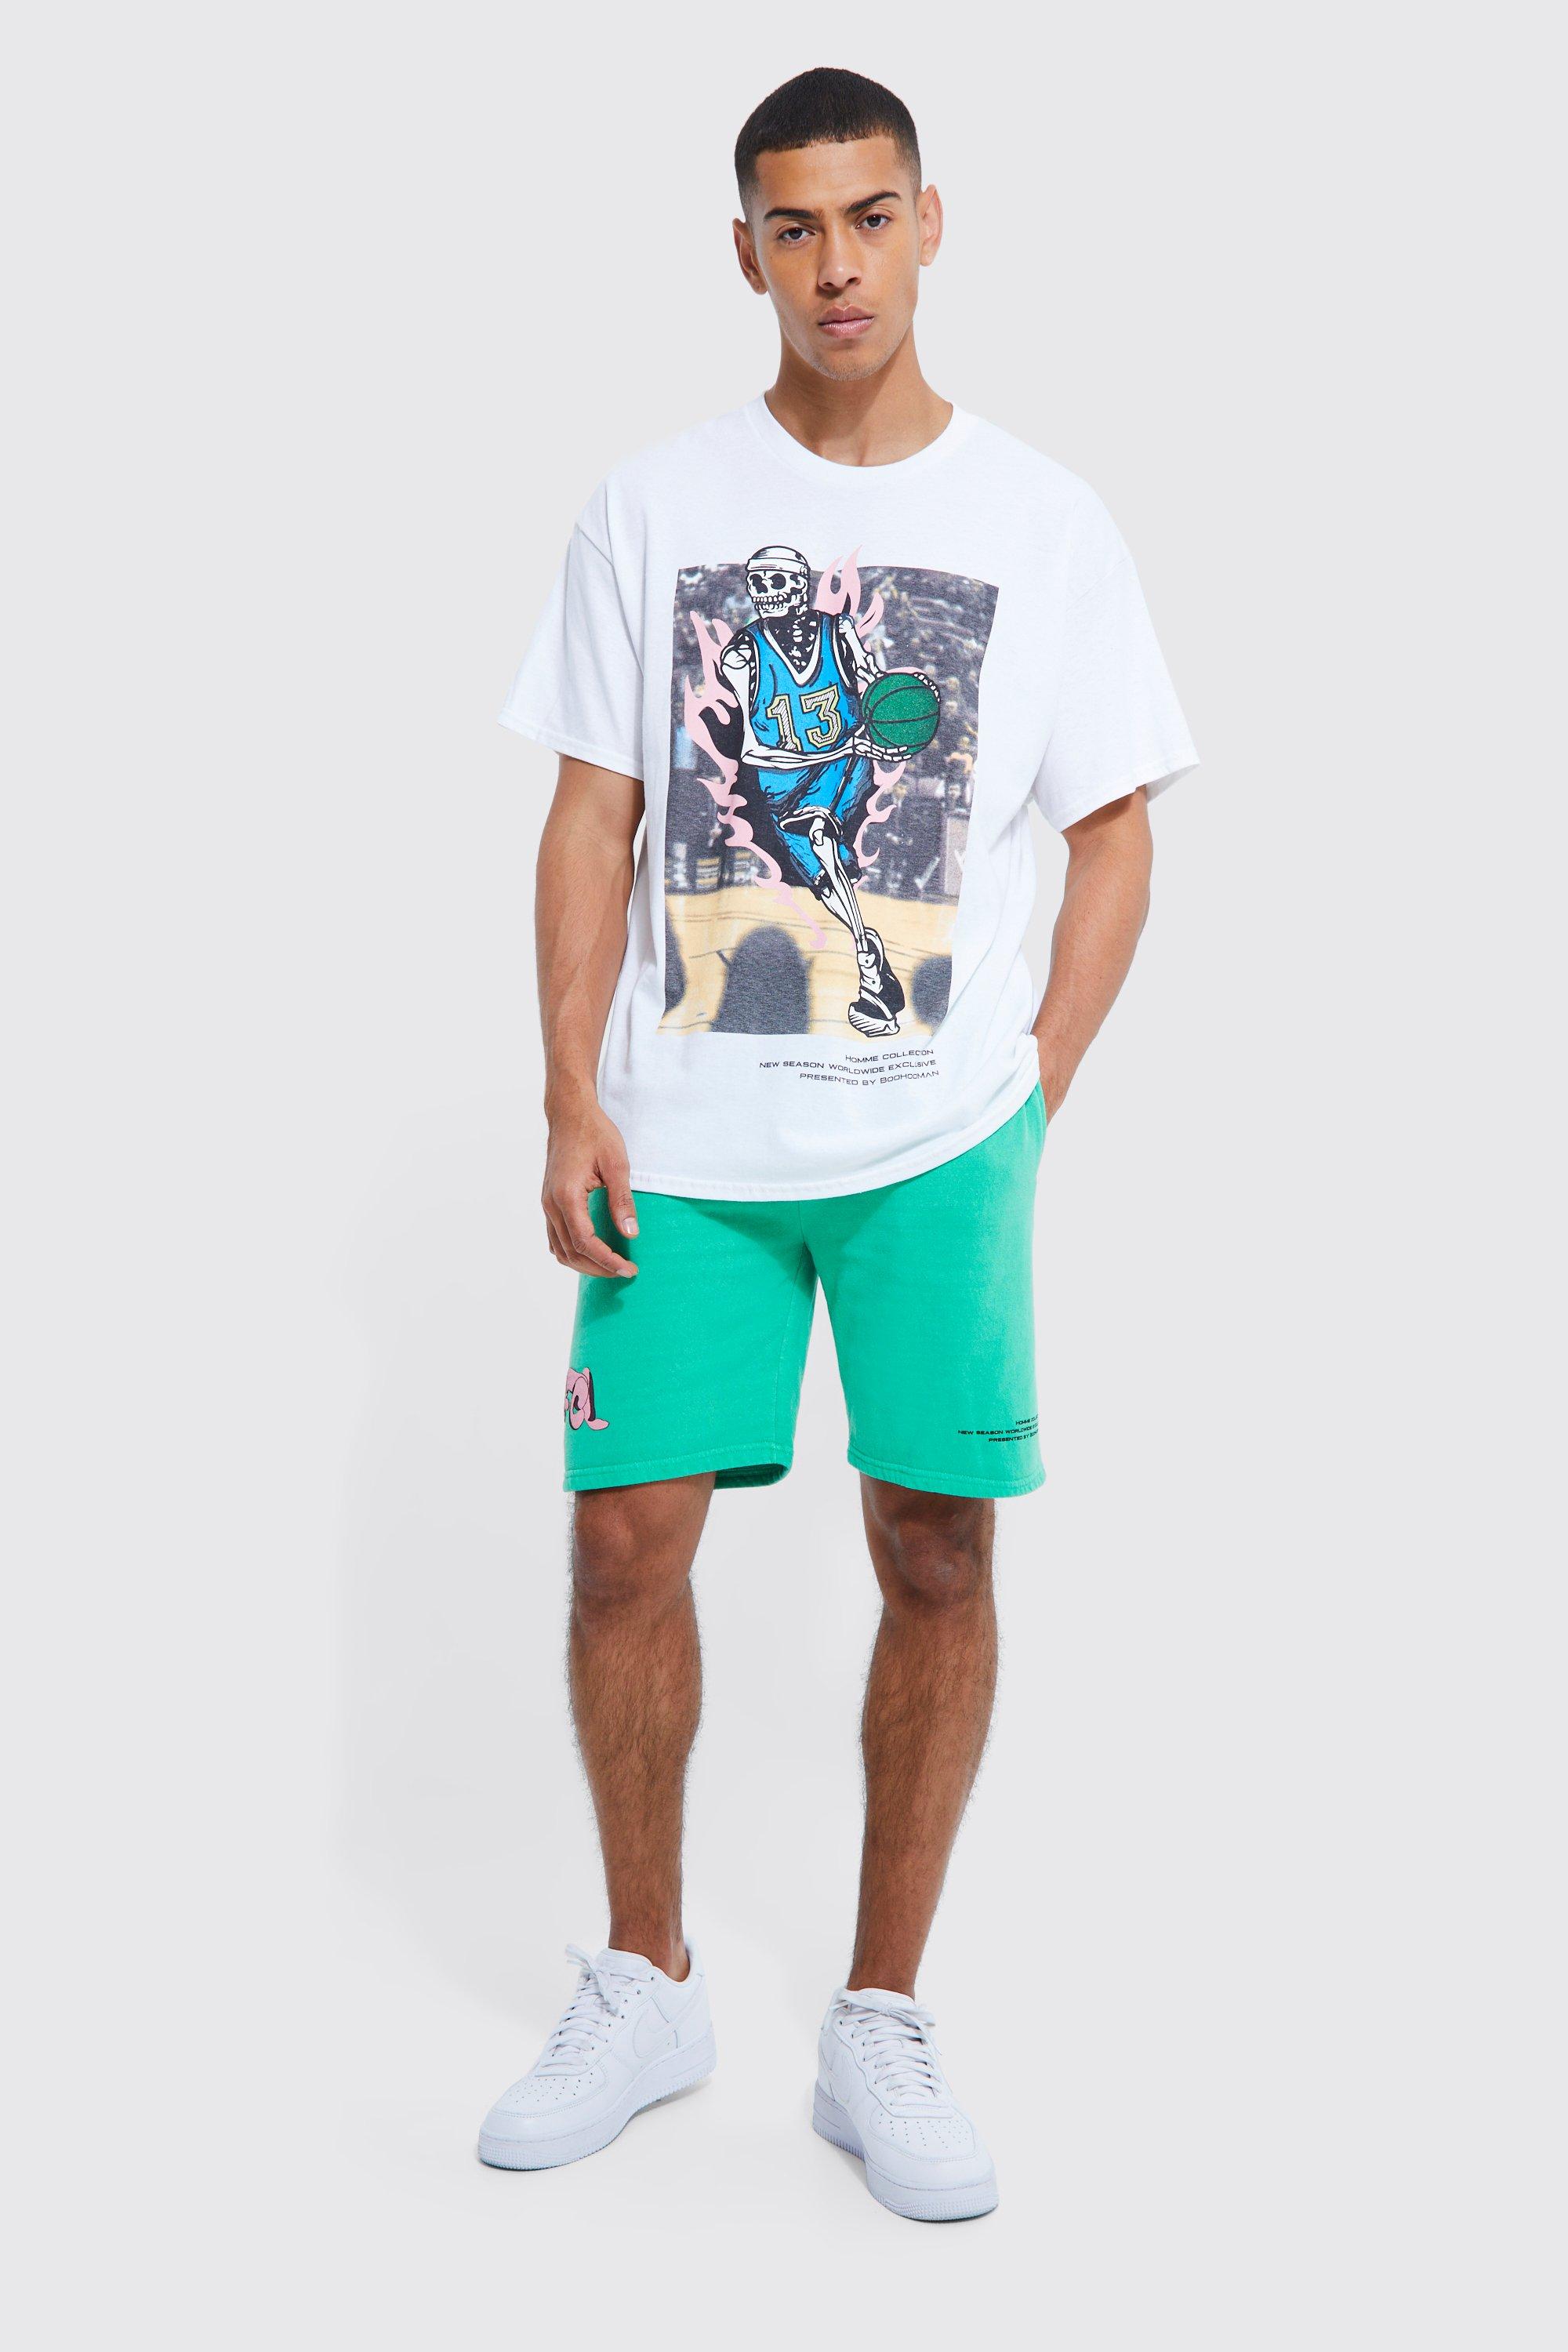 boohooMAN Oversized Pour Homme Graphic T-Shirt - Green - Size XS